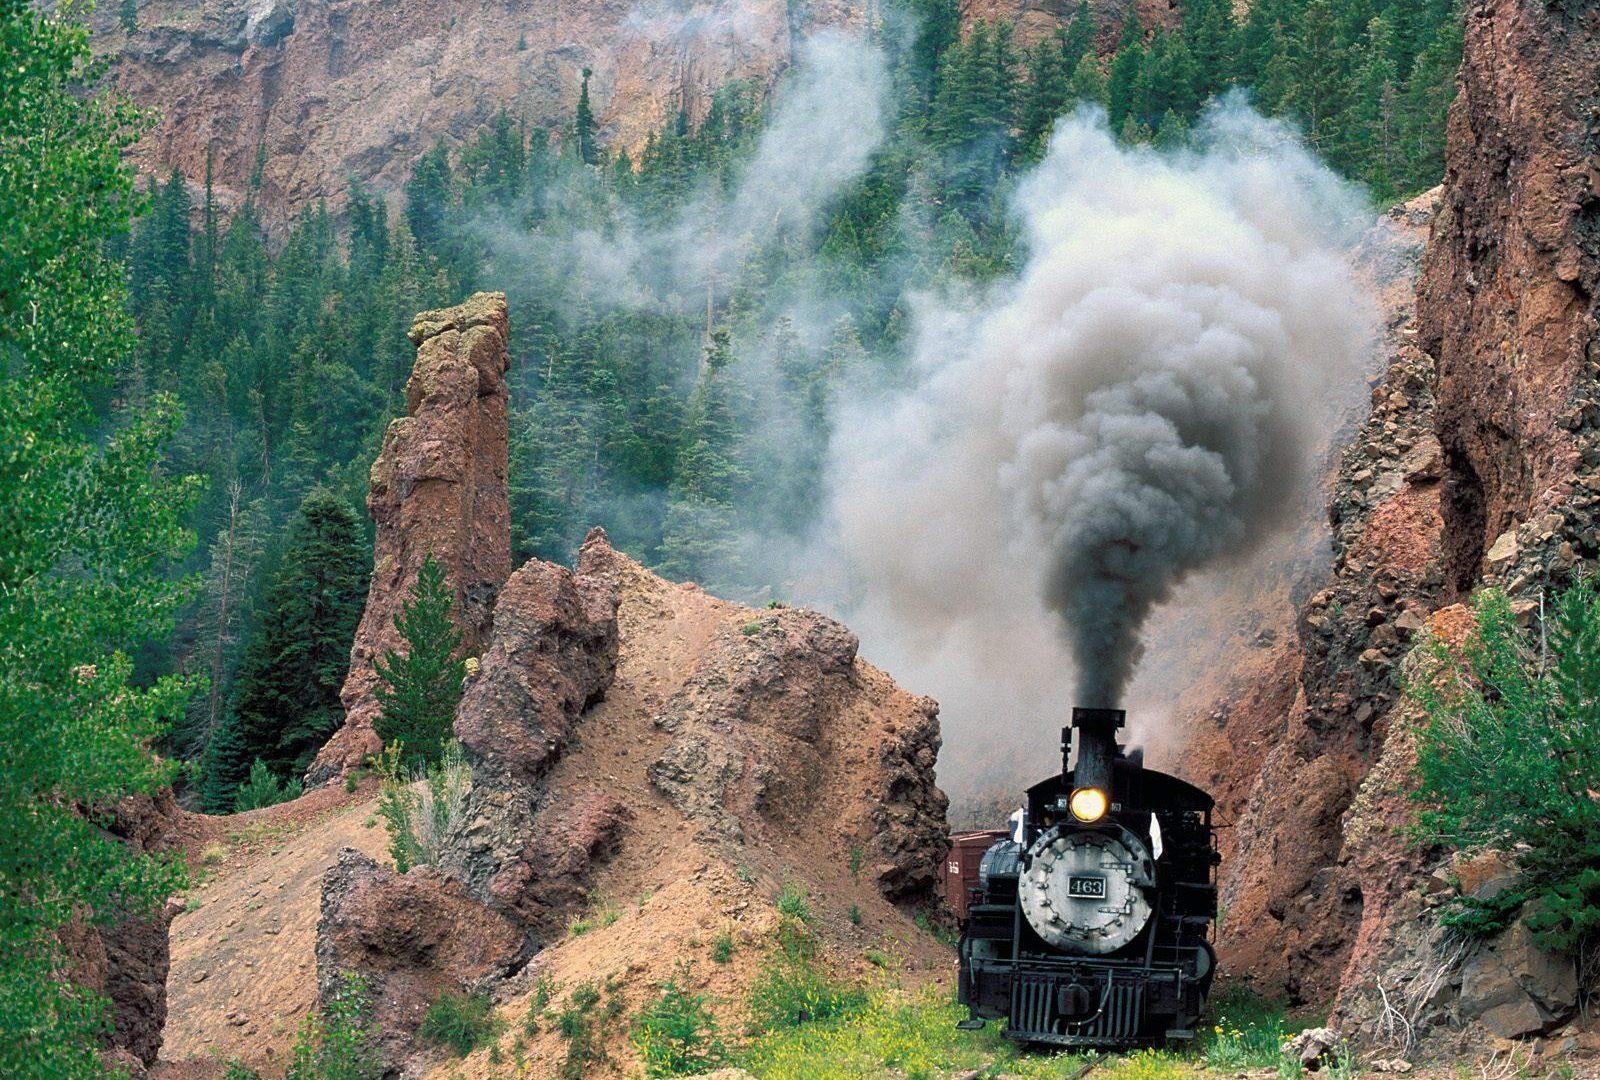 Trains Tag wallpaper: Nature Trains Train Old Mountain Wallpaper